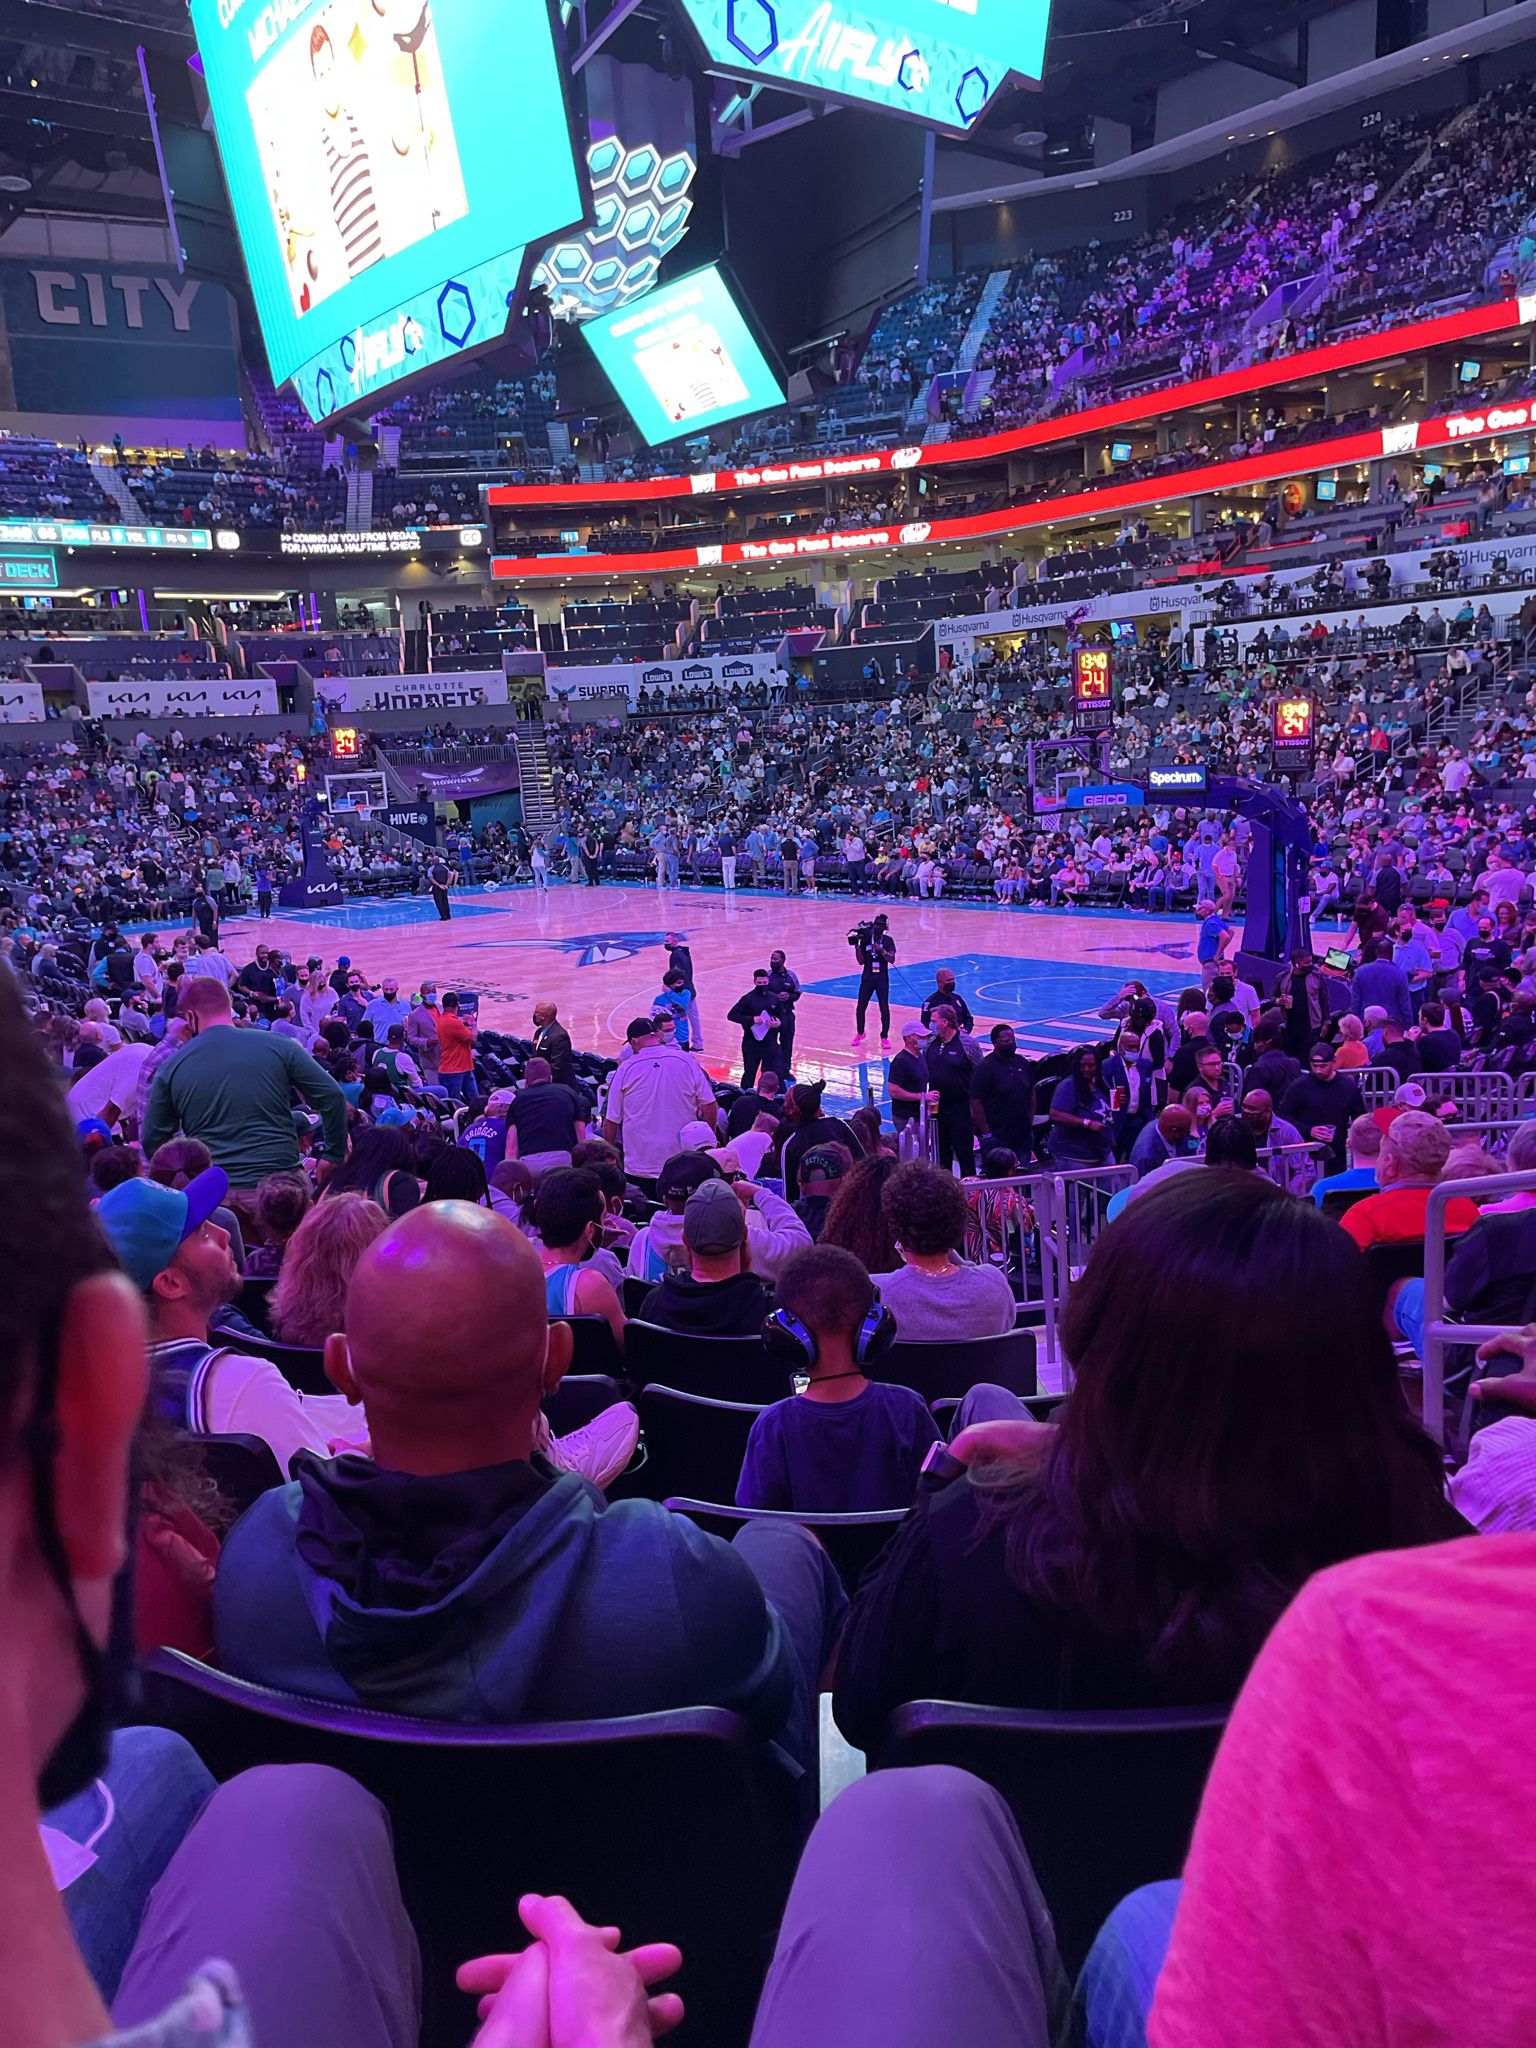 Charlotte Hornets Vs Timberwolves Tickets. Great Thanksgiving Outing